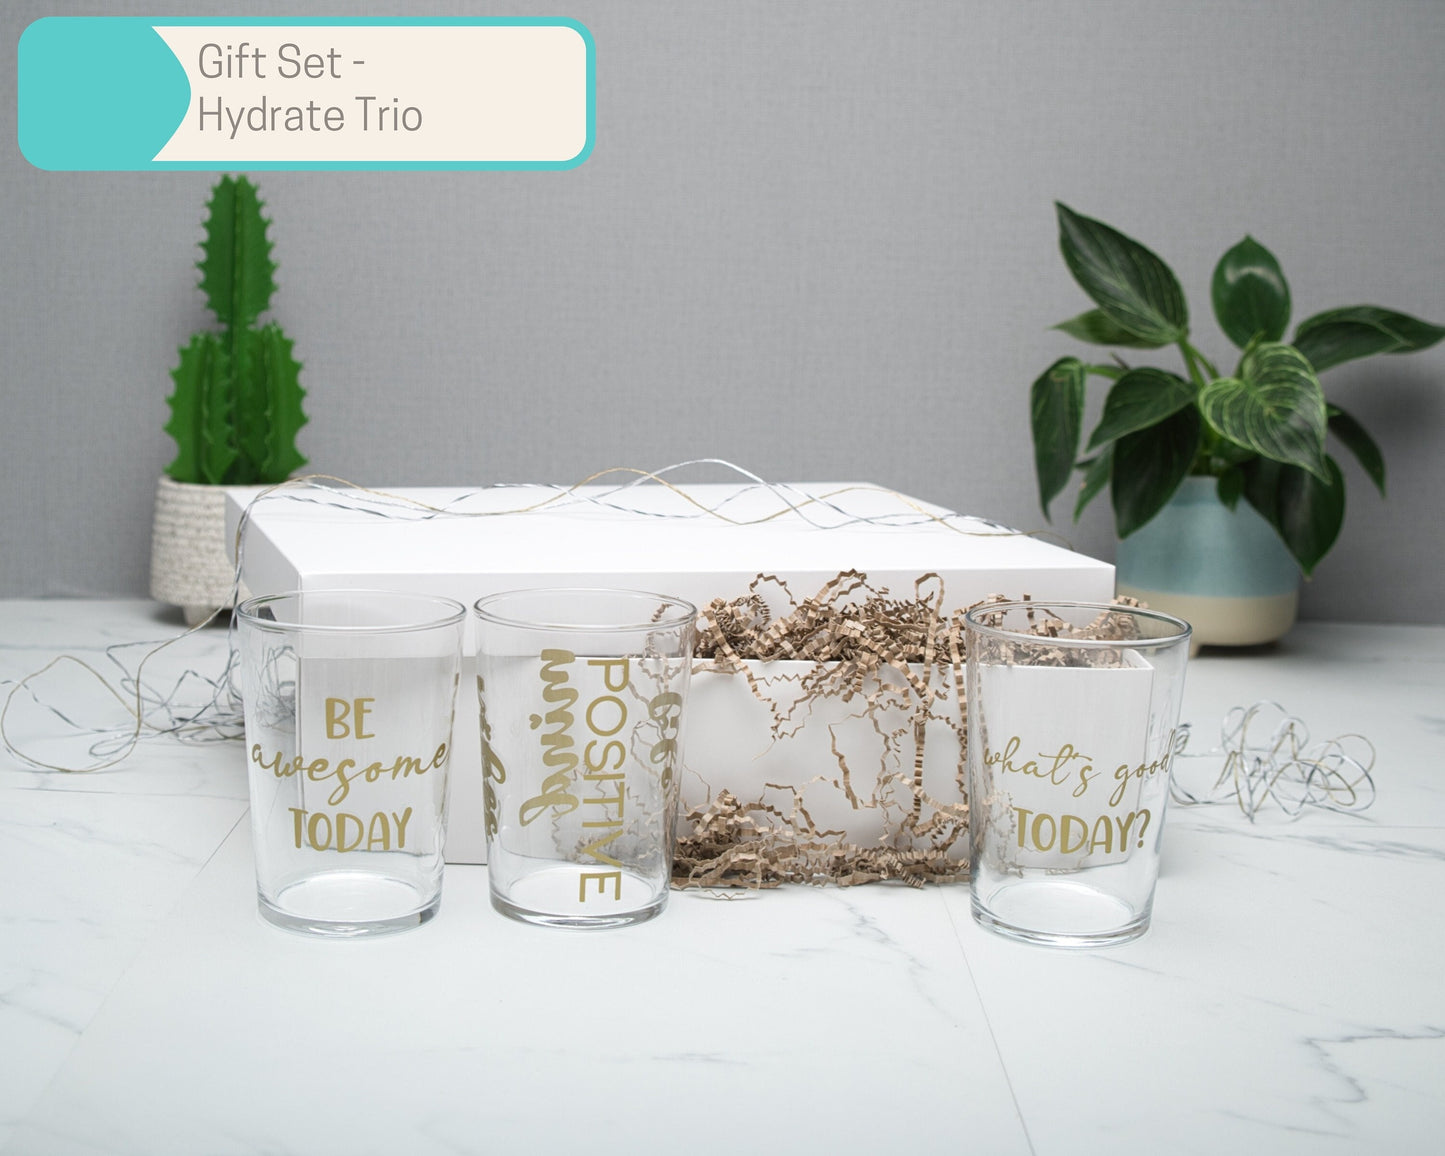 500ml Glass Tumbler Gift Sets with Positive Messages, What's Good Today, Be Awesome Today, Positive Vibes Mind Life, Gift Box